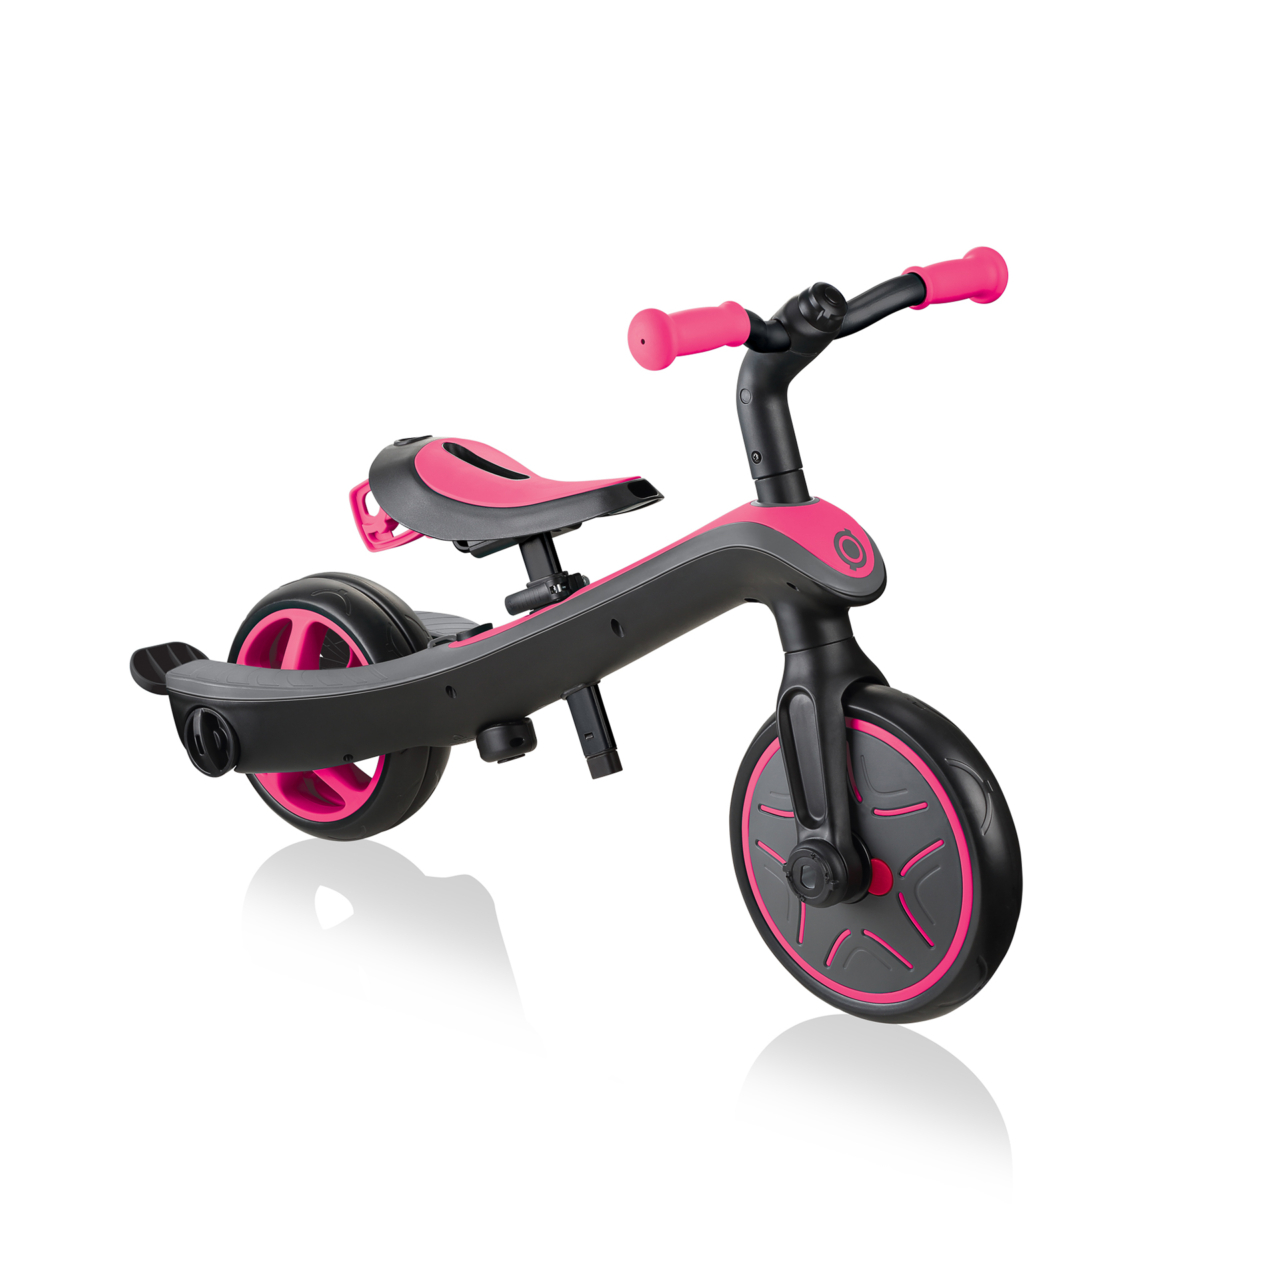 632 110 3 4 In 1 Tricycle Balance Bike